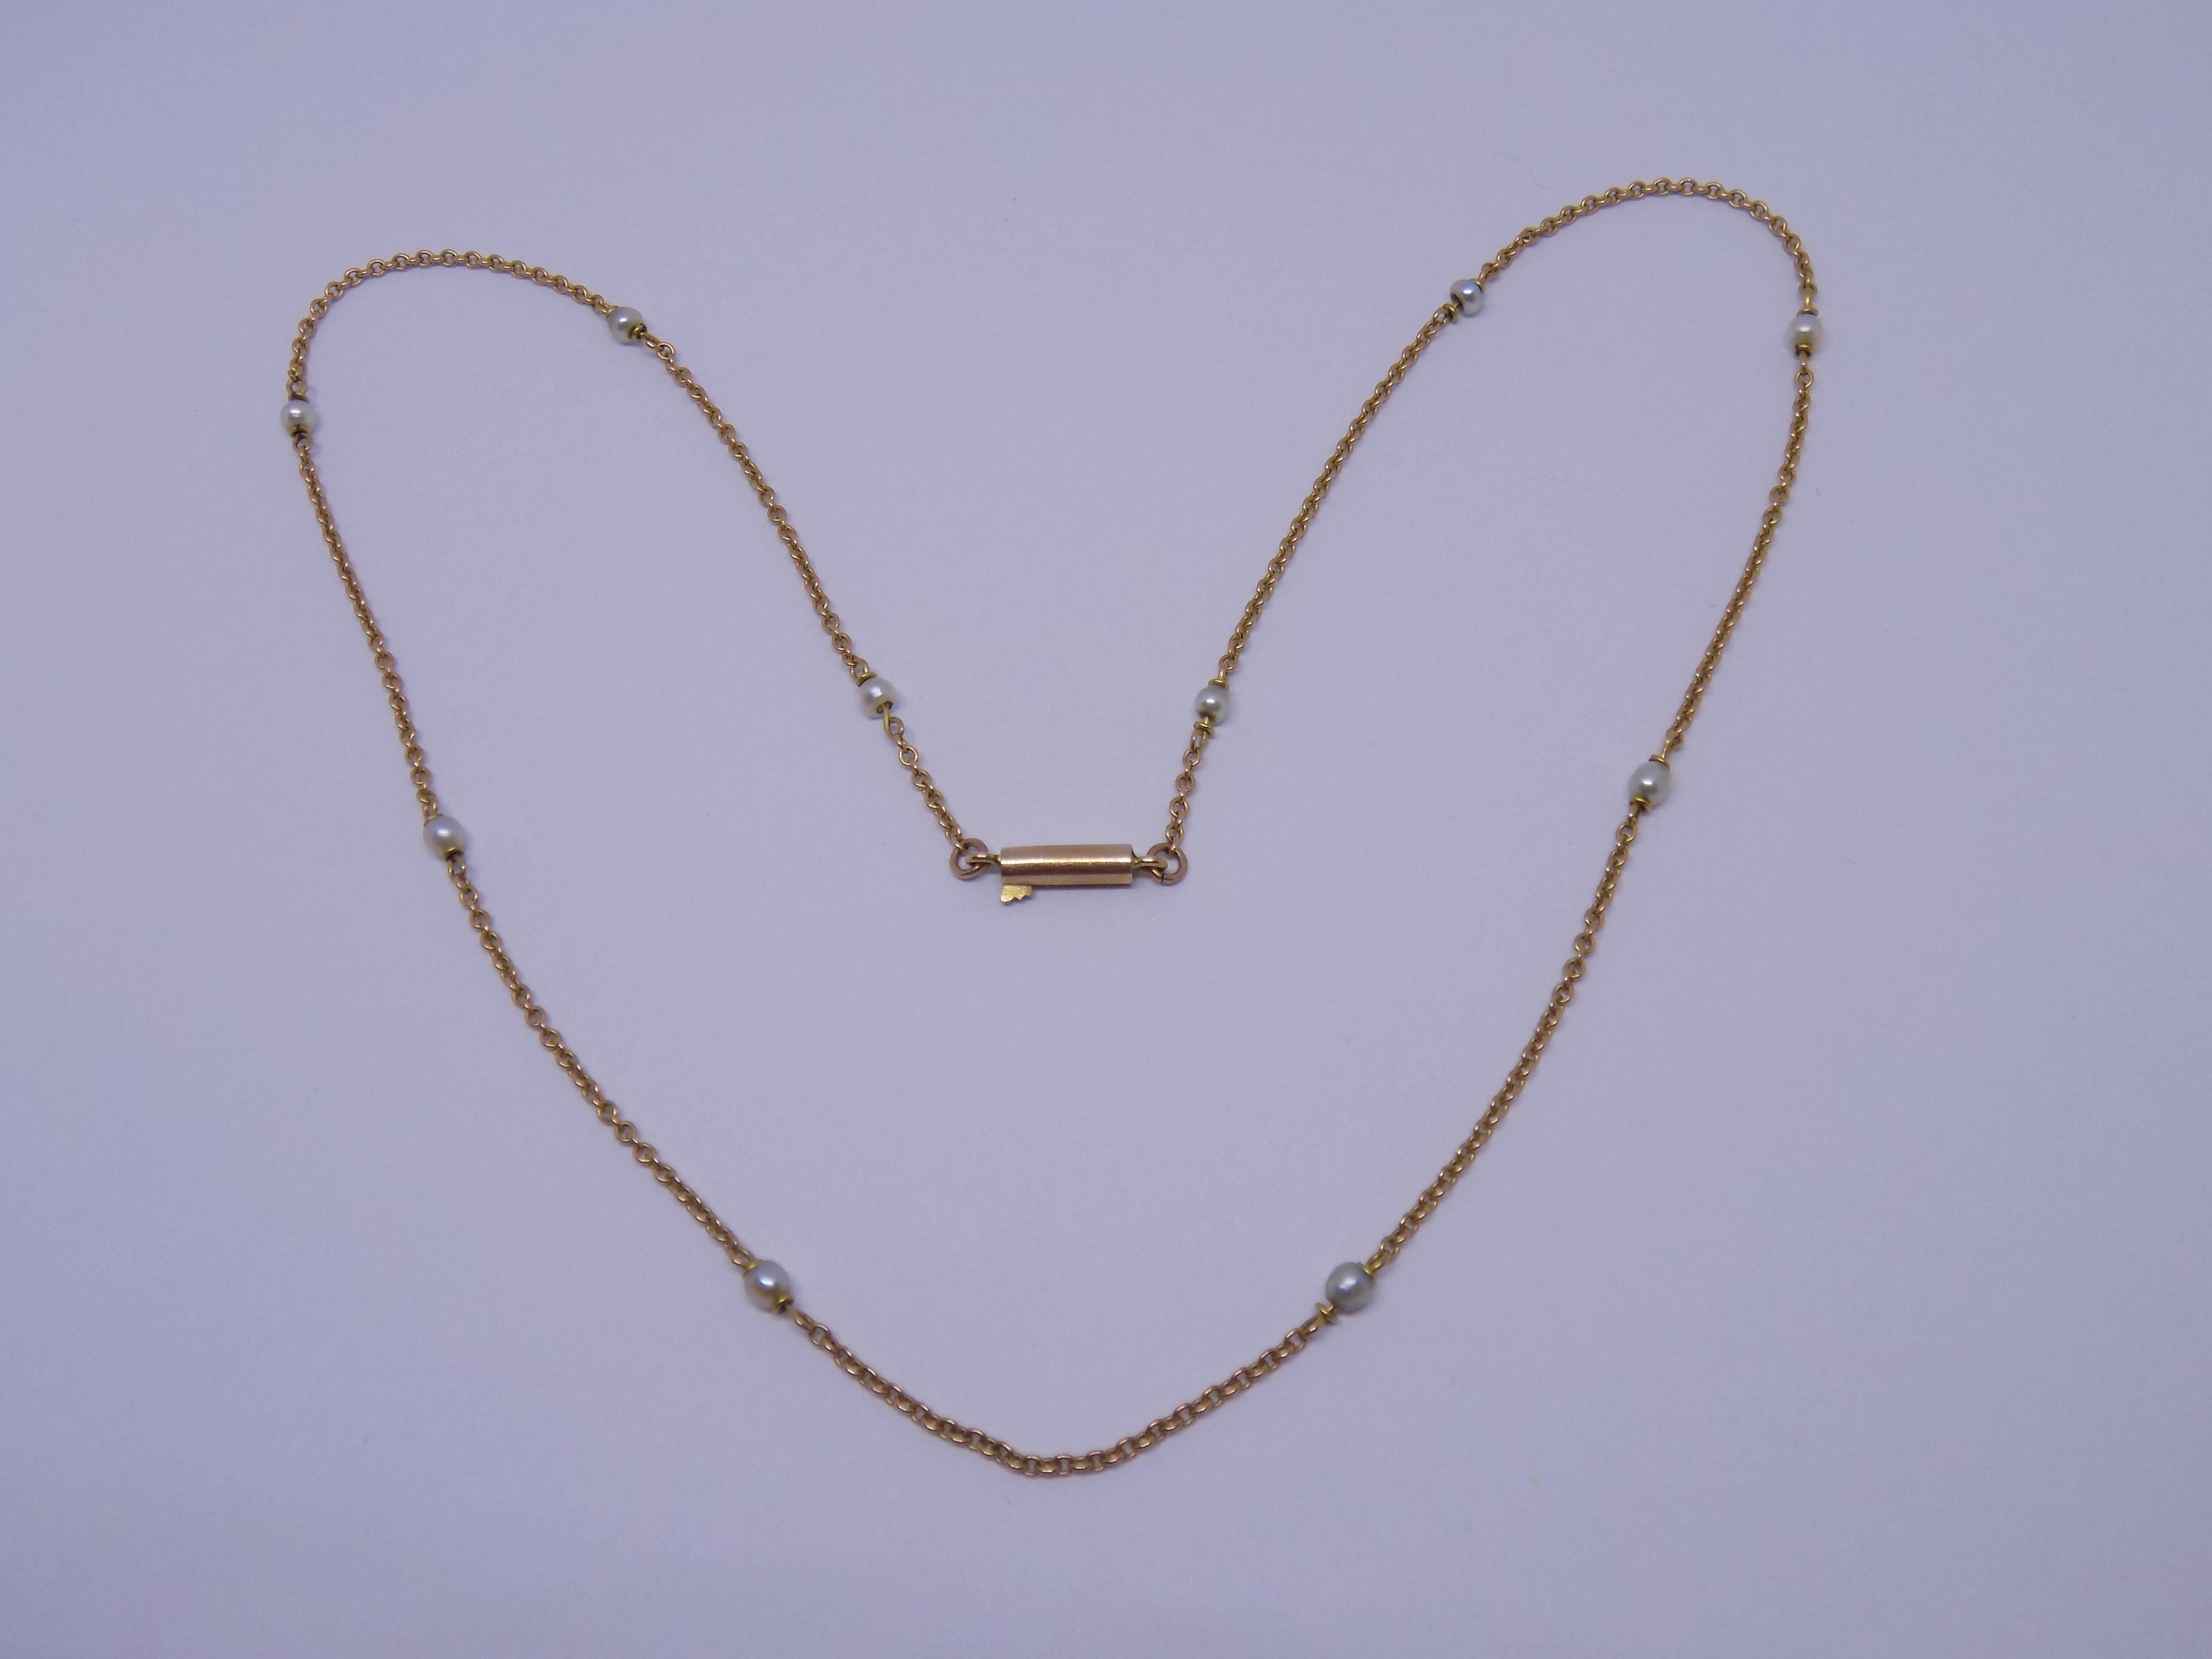 A Lovely Edwardian c.1900s Gold and natural seed Pearl necklace chain. English origin.

Length 16 1/2